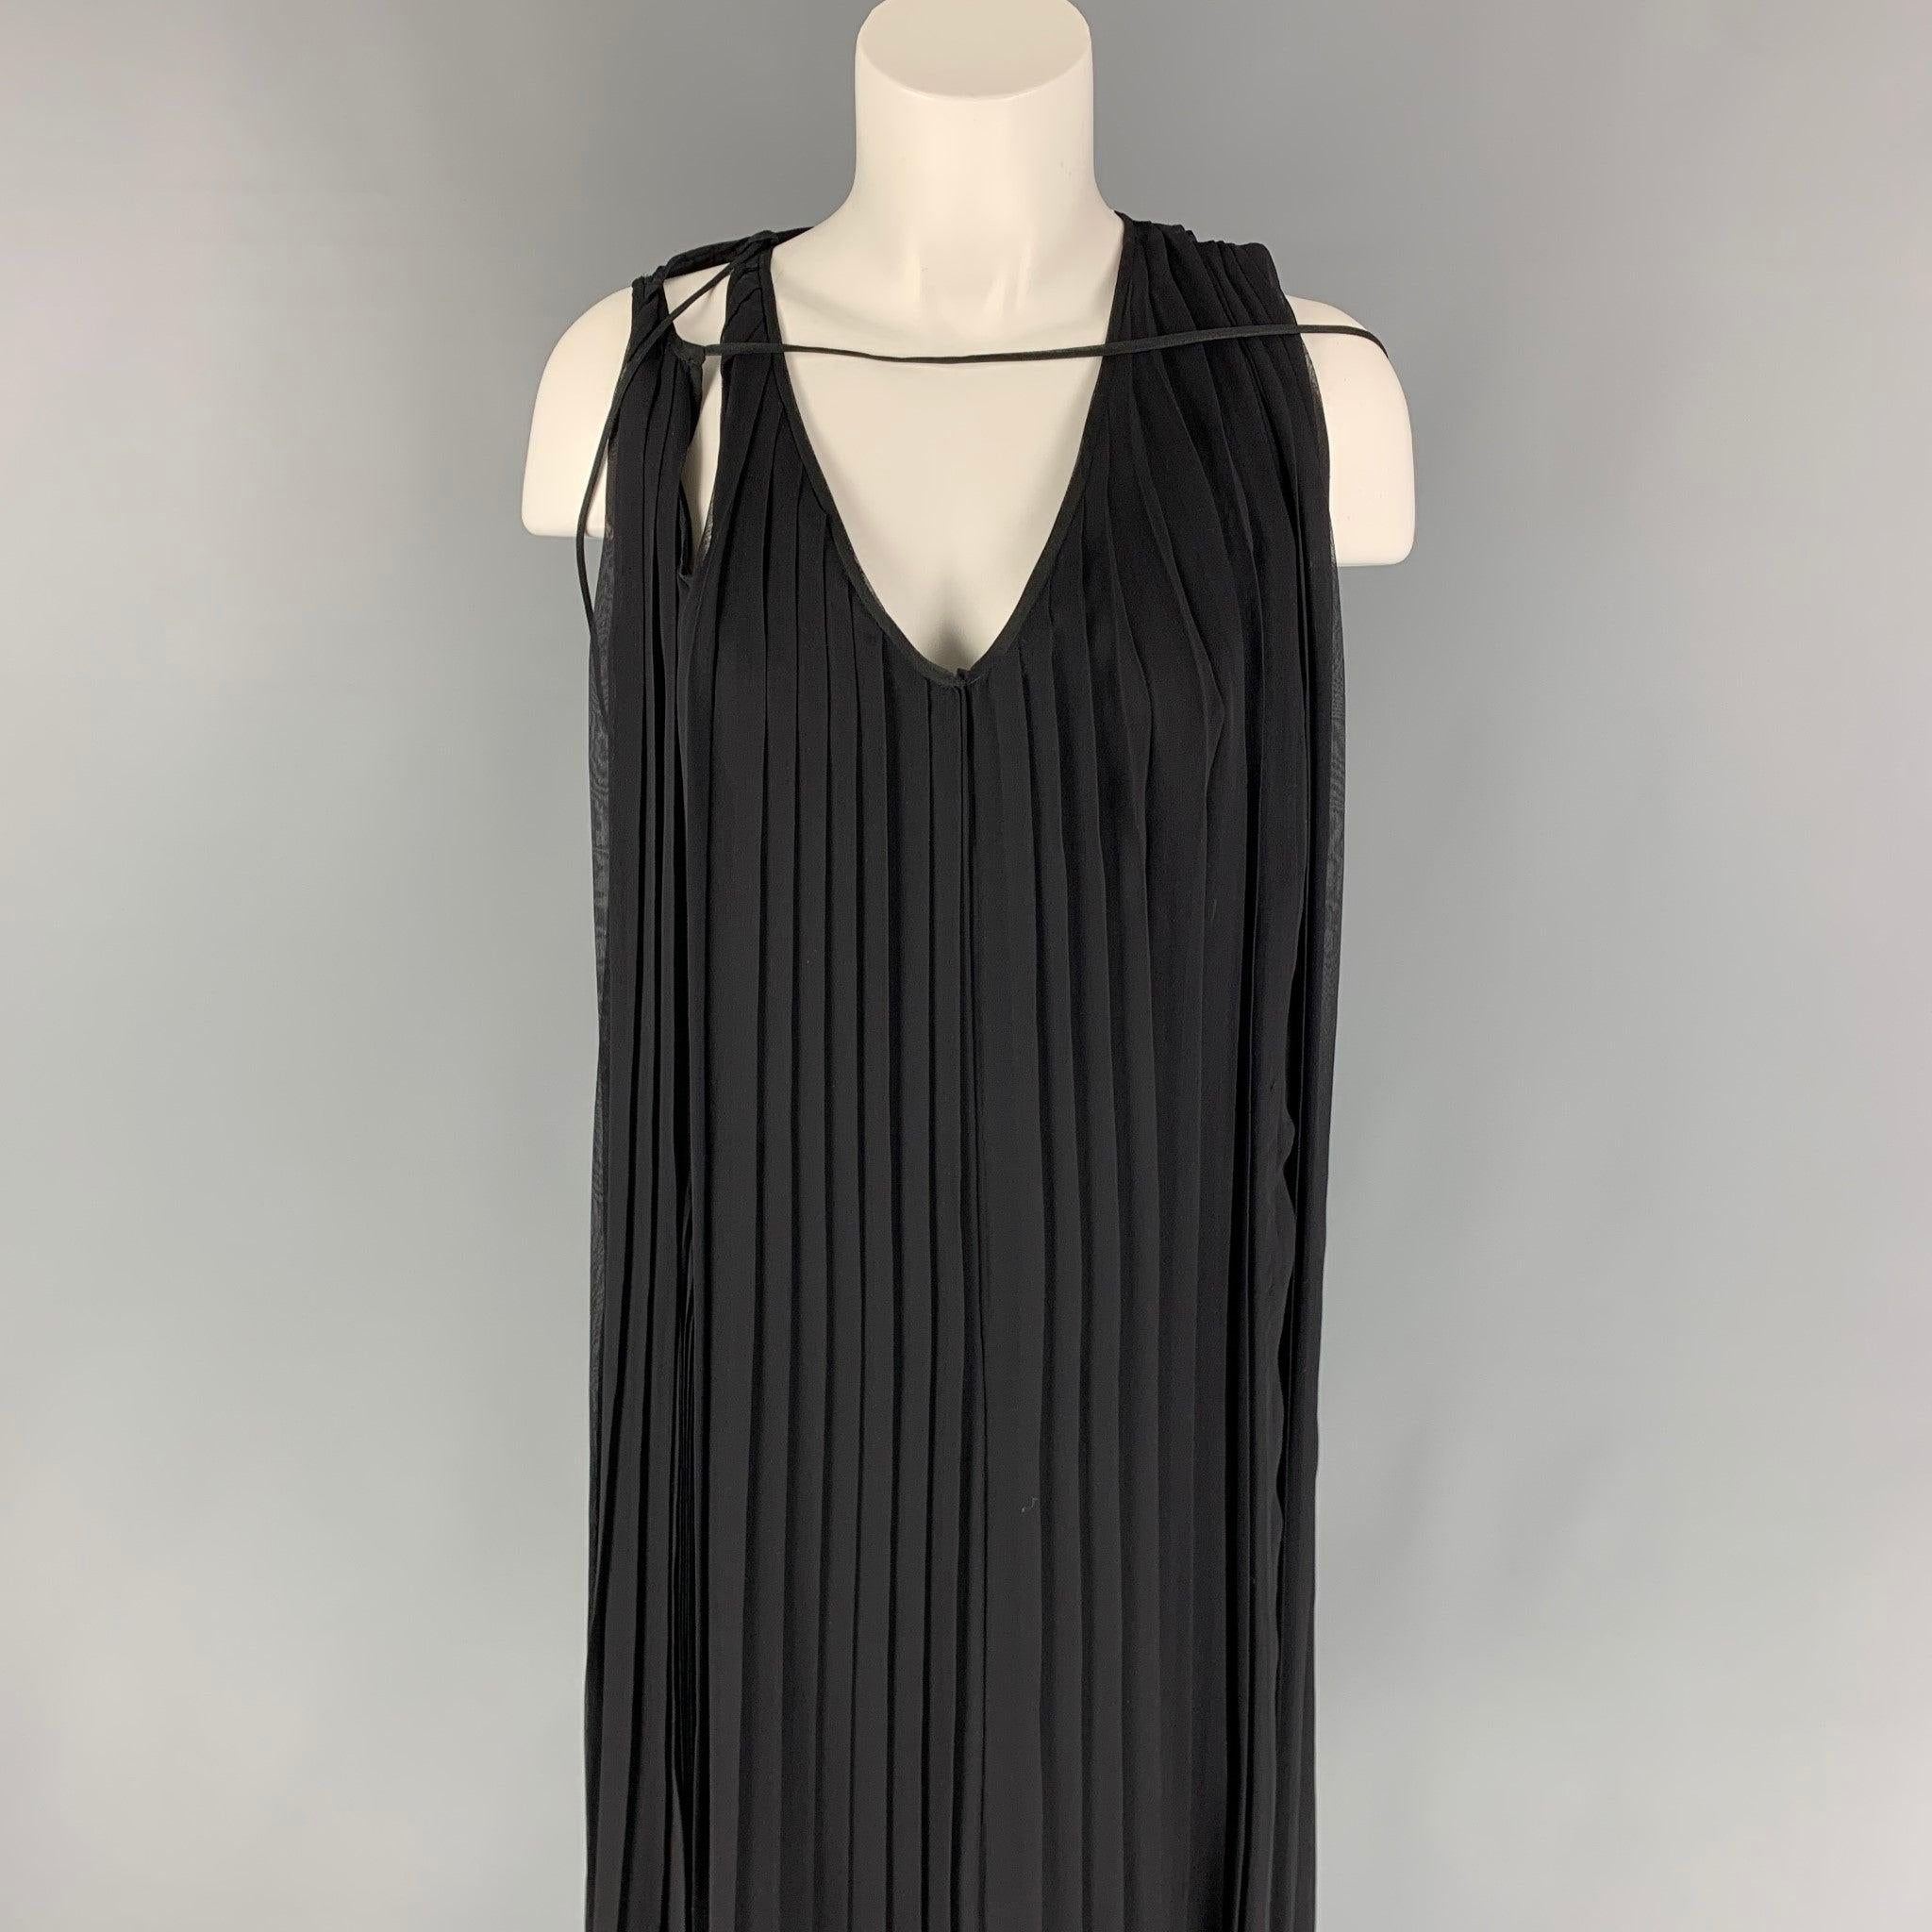 HUSSEIN CHALAYAN dress comes in a black pleated silk featuring an a-line style, sleeveless, and a v-neck. String detail attached could be styled in other ways.
Very Good
Pre-Owned Condition. 

Marked:   M 

Measurements: 
 
Shoulder: 13 inches 